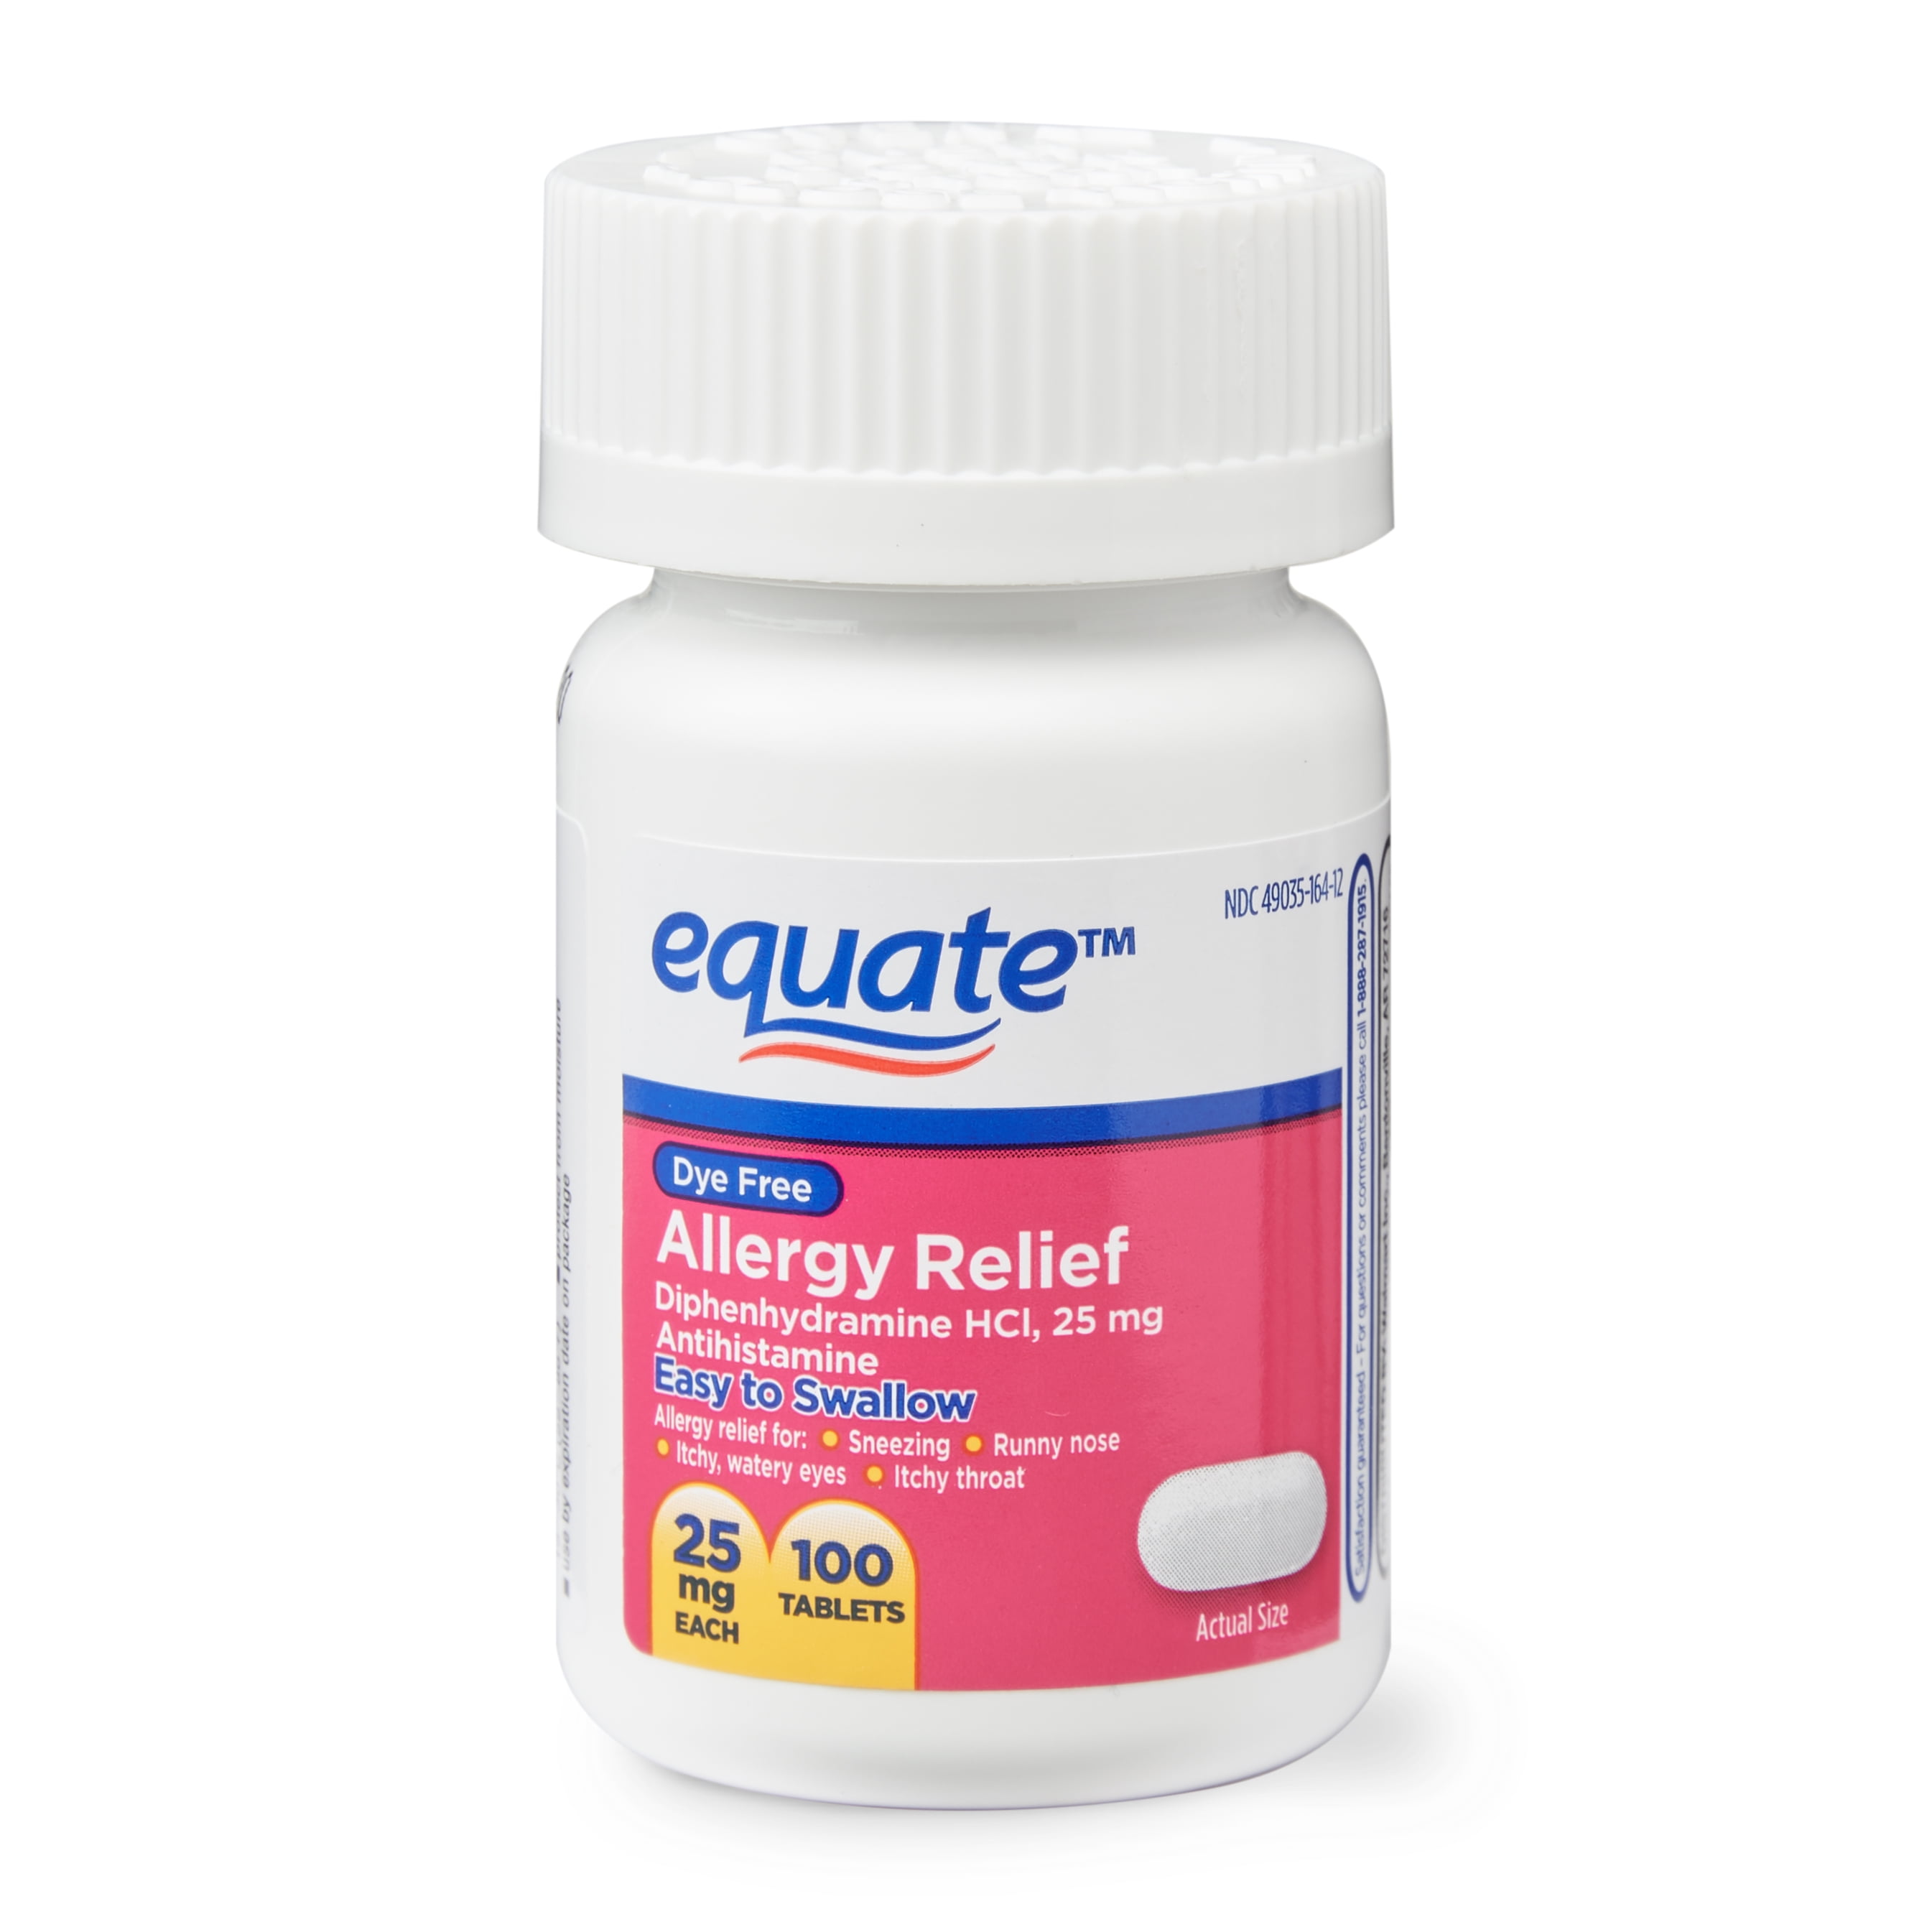 Equate Dye-Free Allergy Relief Medicine, 25 mg, 100ct Tablets 